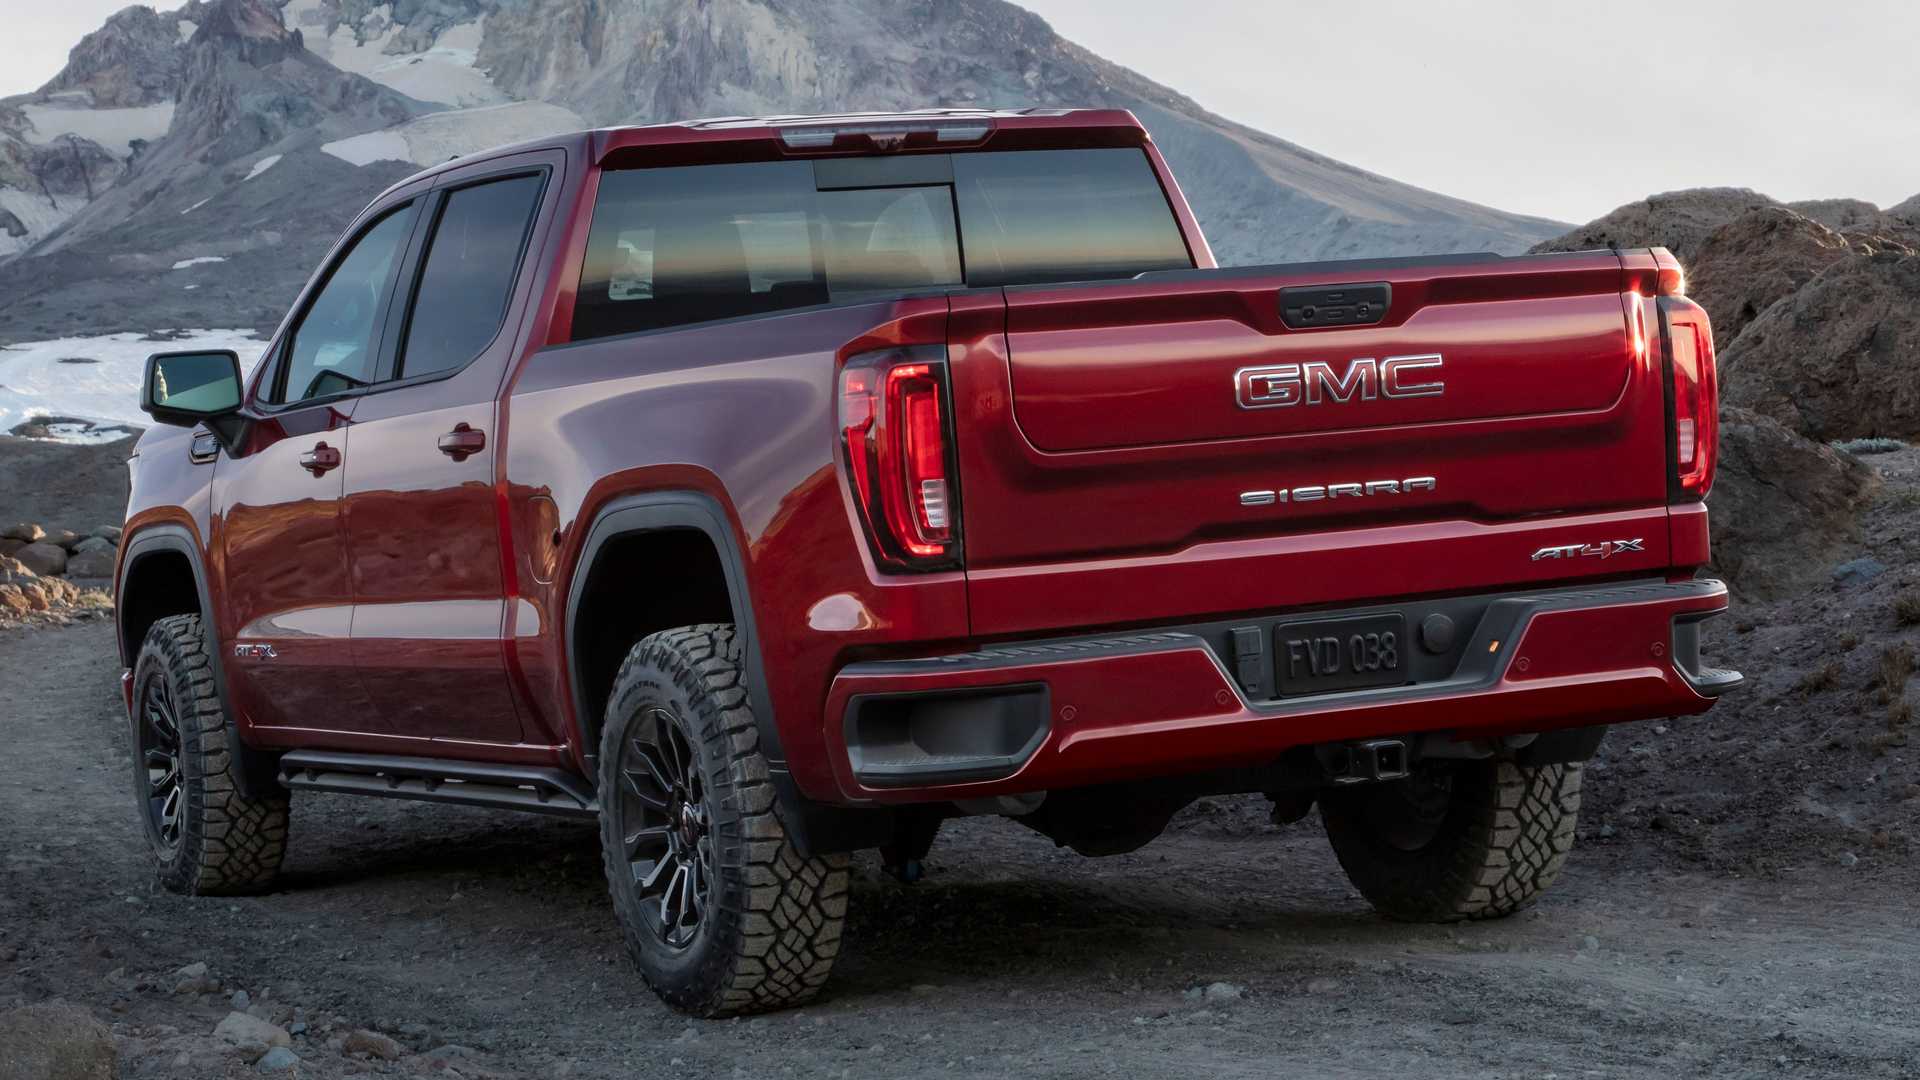 Official! 2022 GMC Sierra 1500: Changes Needed, More Luxury